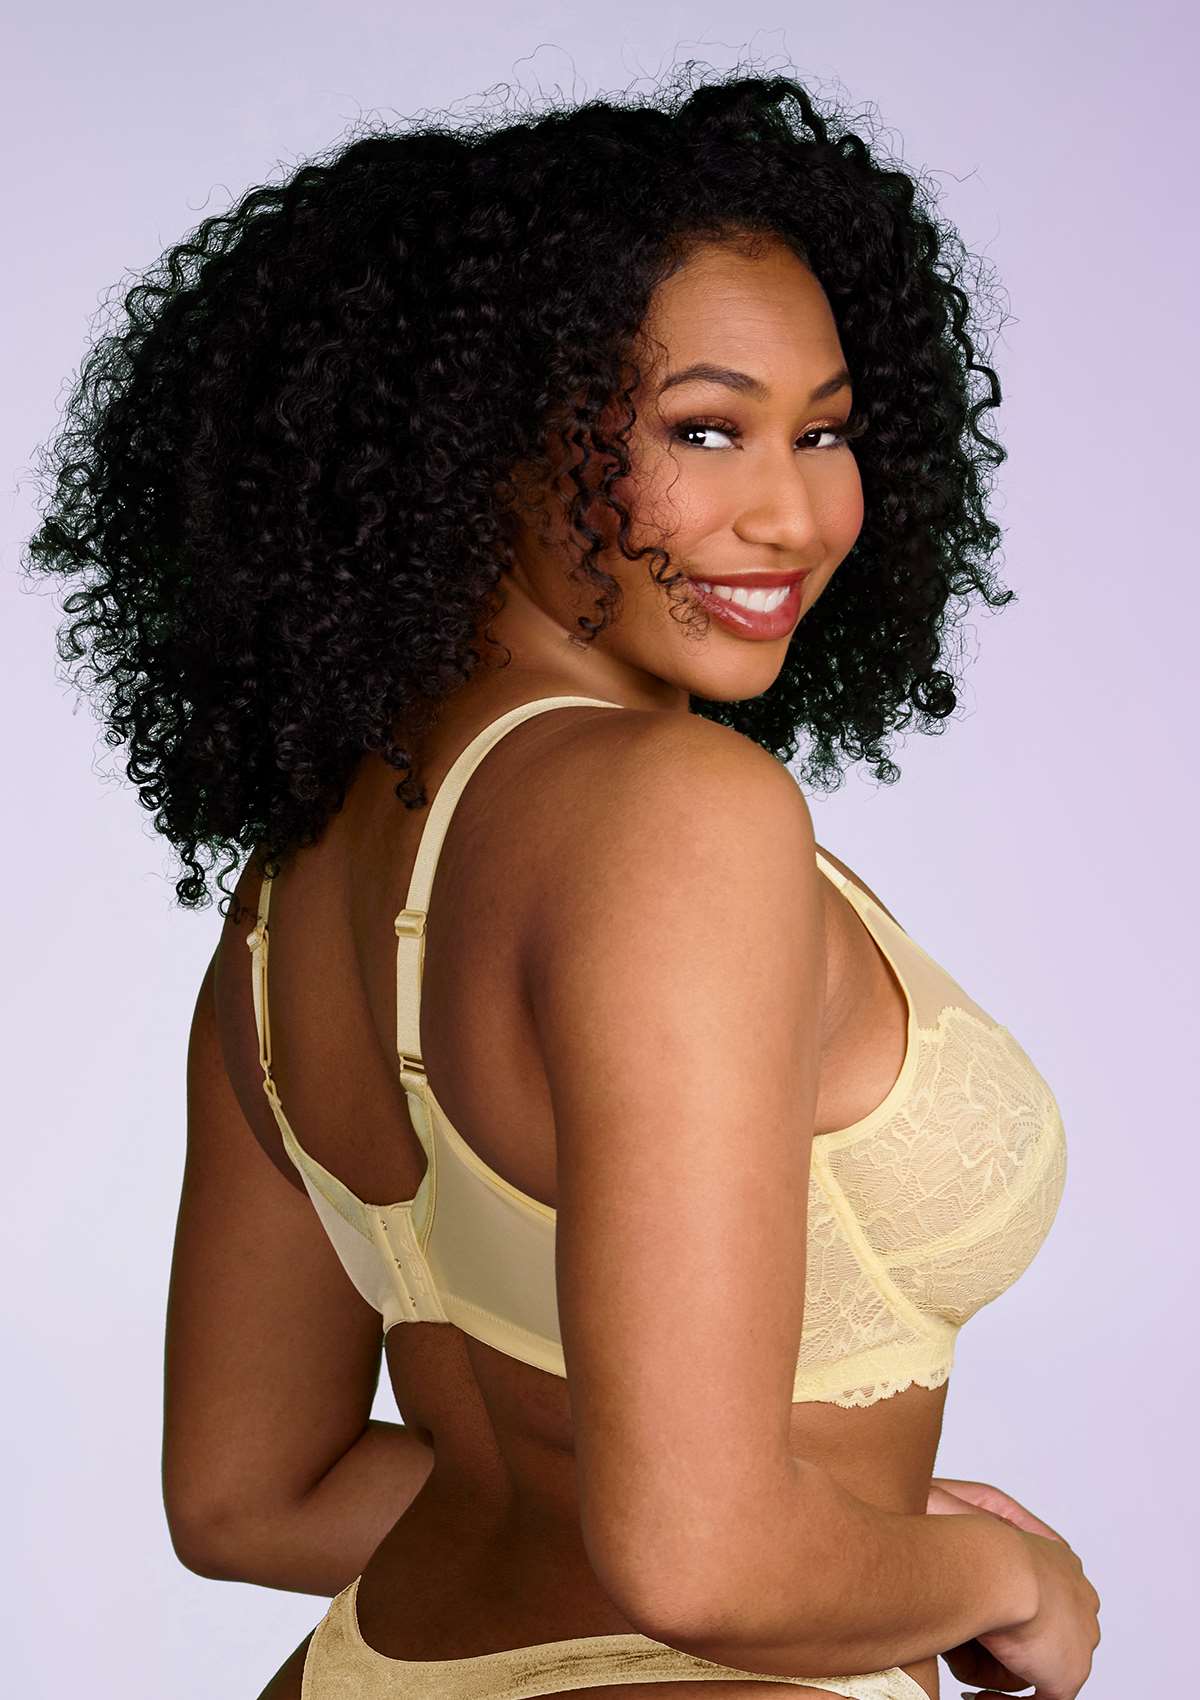 HSIA Blossom Full Coverage Side Support Bra: Designed For Heavy Busts - Light Yellow / 44 / D